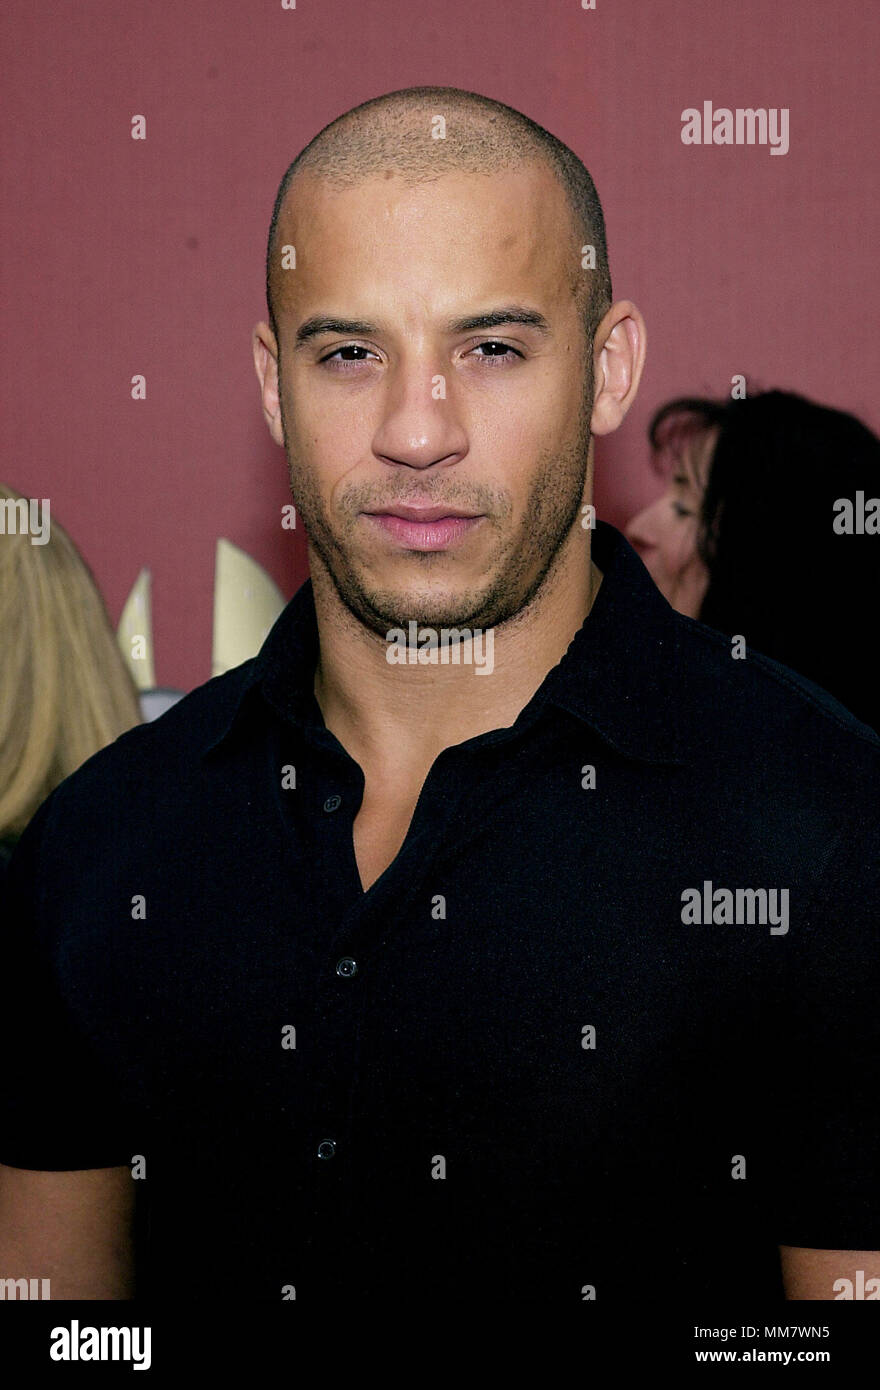 Vin Diesel arriving at the 1st World Stunt Awards at the Barker Hangar in Santa Monica Airport in Los Angeles  5/20/2001 DieselVin01.jpgDieselVin01 Red Carpet Event, Vertical, USA, Film Industry, Celebrities,  Photography, Bestof, Arts Culture and Entertainment, Topix Celebrities fashion /  Vertical, Best of, Event in Hollywood Life - California,  Red Carpet and backstage, USA, Film Industry, Celebrities,  movie celebrities, TV celebrities, Music celebrities, Photography, Bestof, Arts Culture and Entertainment,  Topix, headshot, vertical, one person,, from the year , 2001, inquiry tsuni@Gamma- Stock Photo